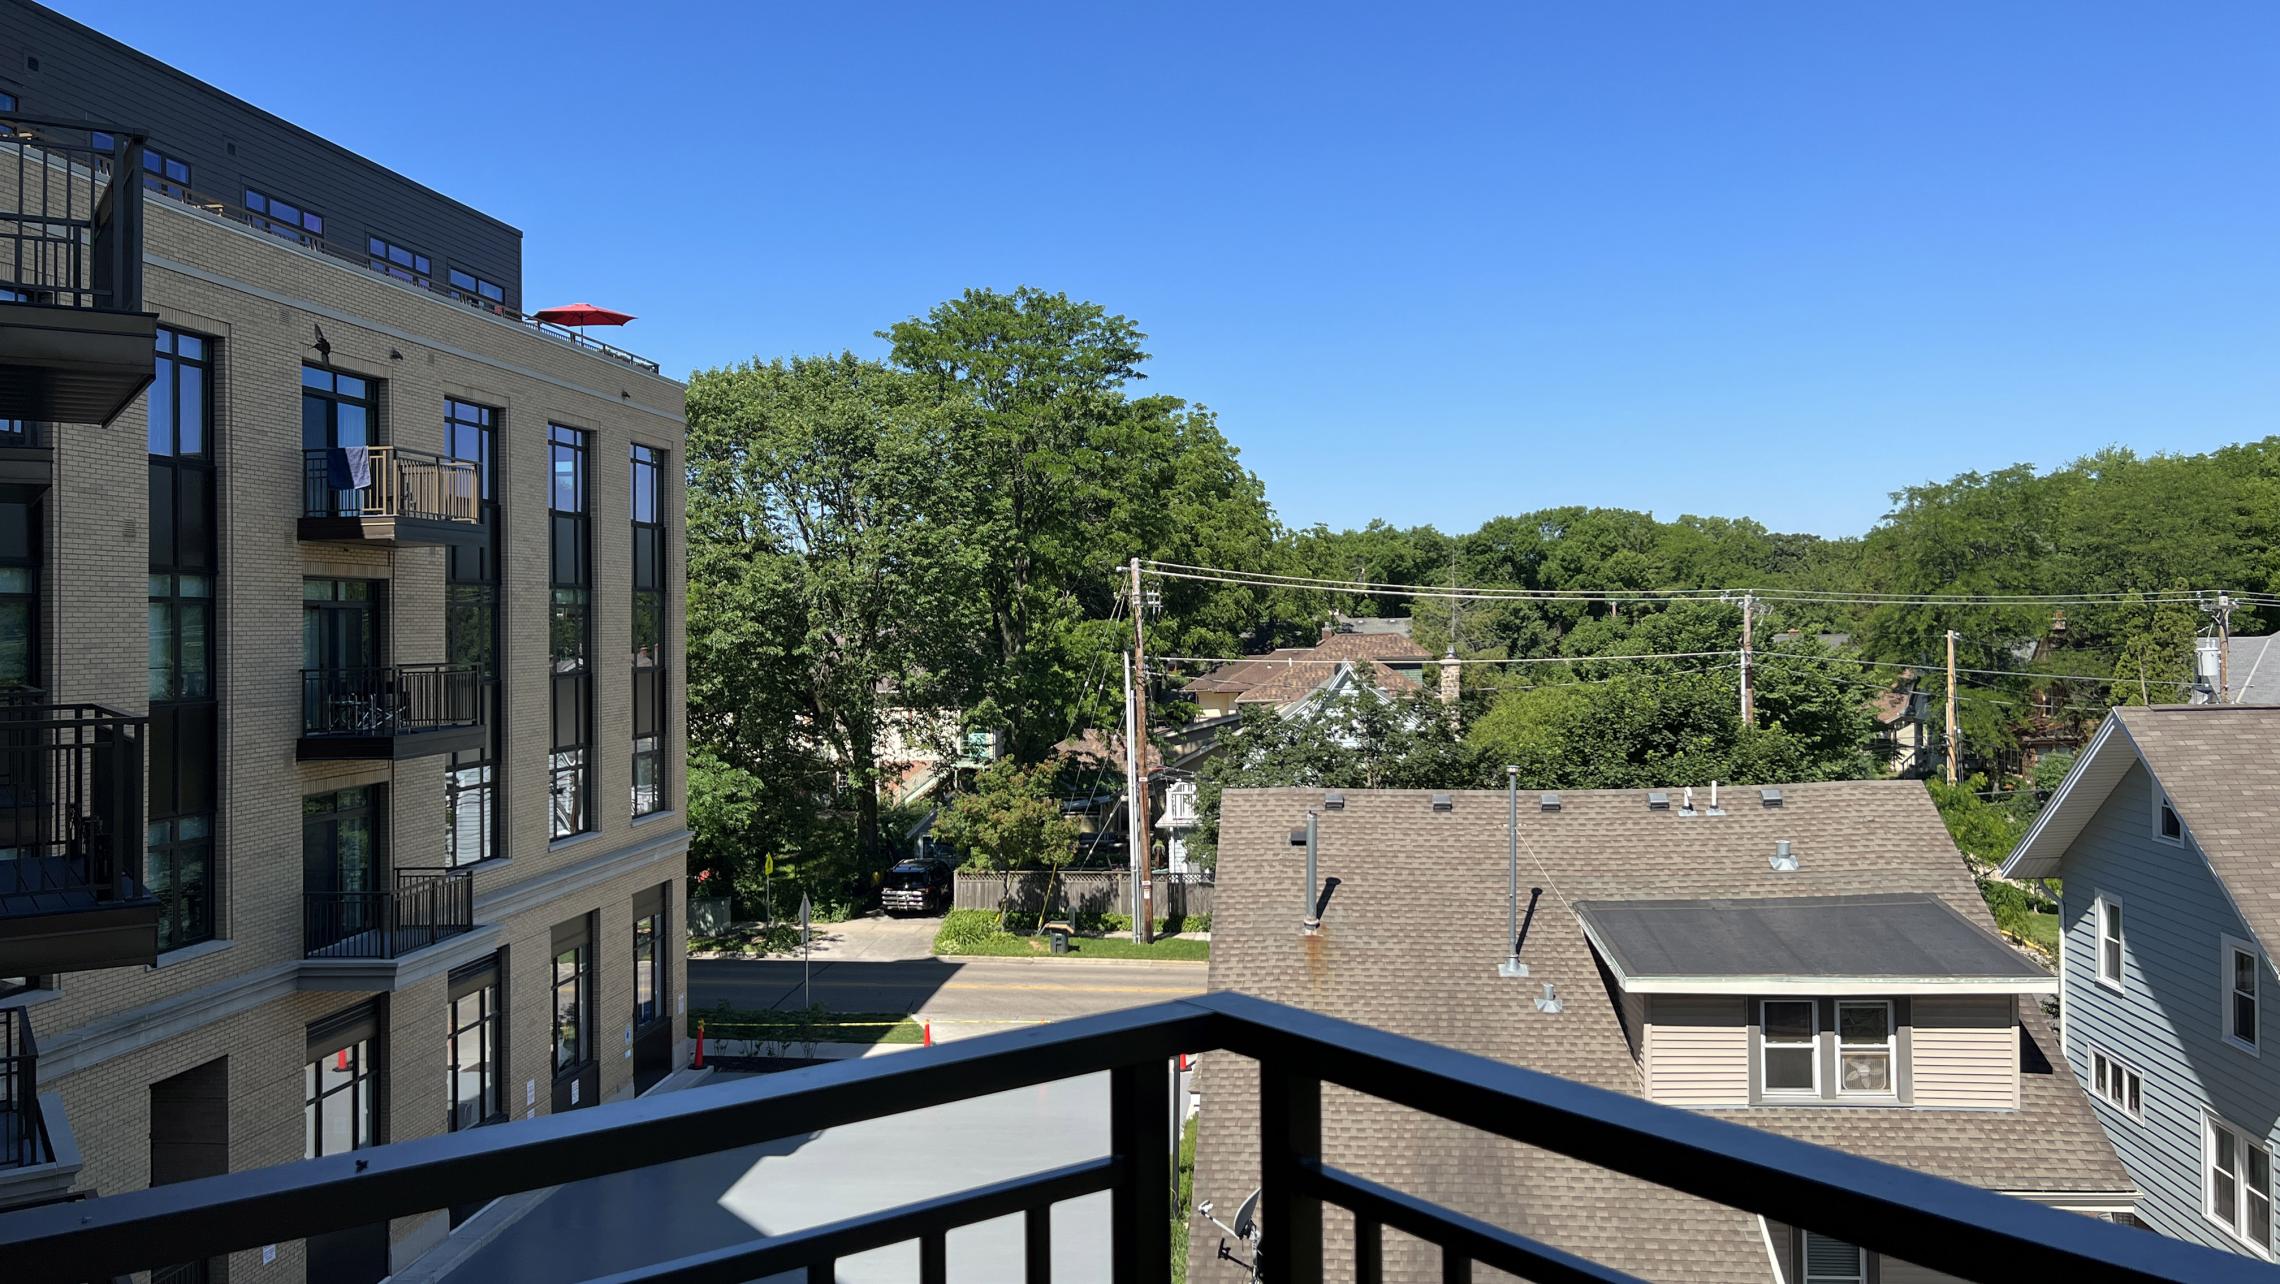 1722-Monroe-Apartment-308-One-Bedroom-Luxury-Living-Kitchen-Design-Rooftop-Terrace-Views-City-Madison-Fitness-Lounge-Balcony-Lifestyle-Capitol